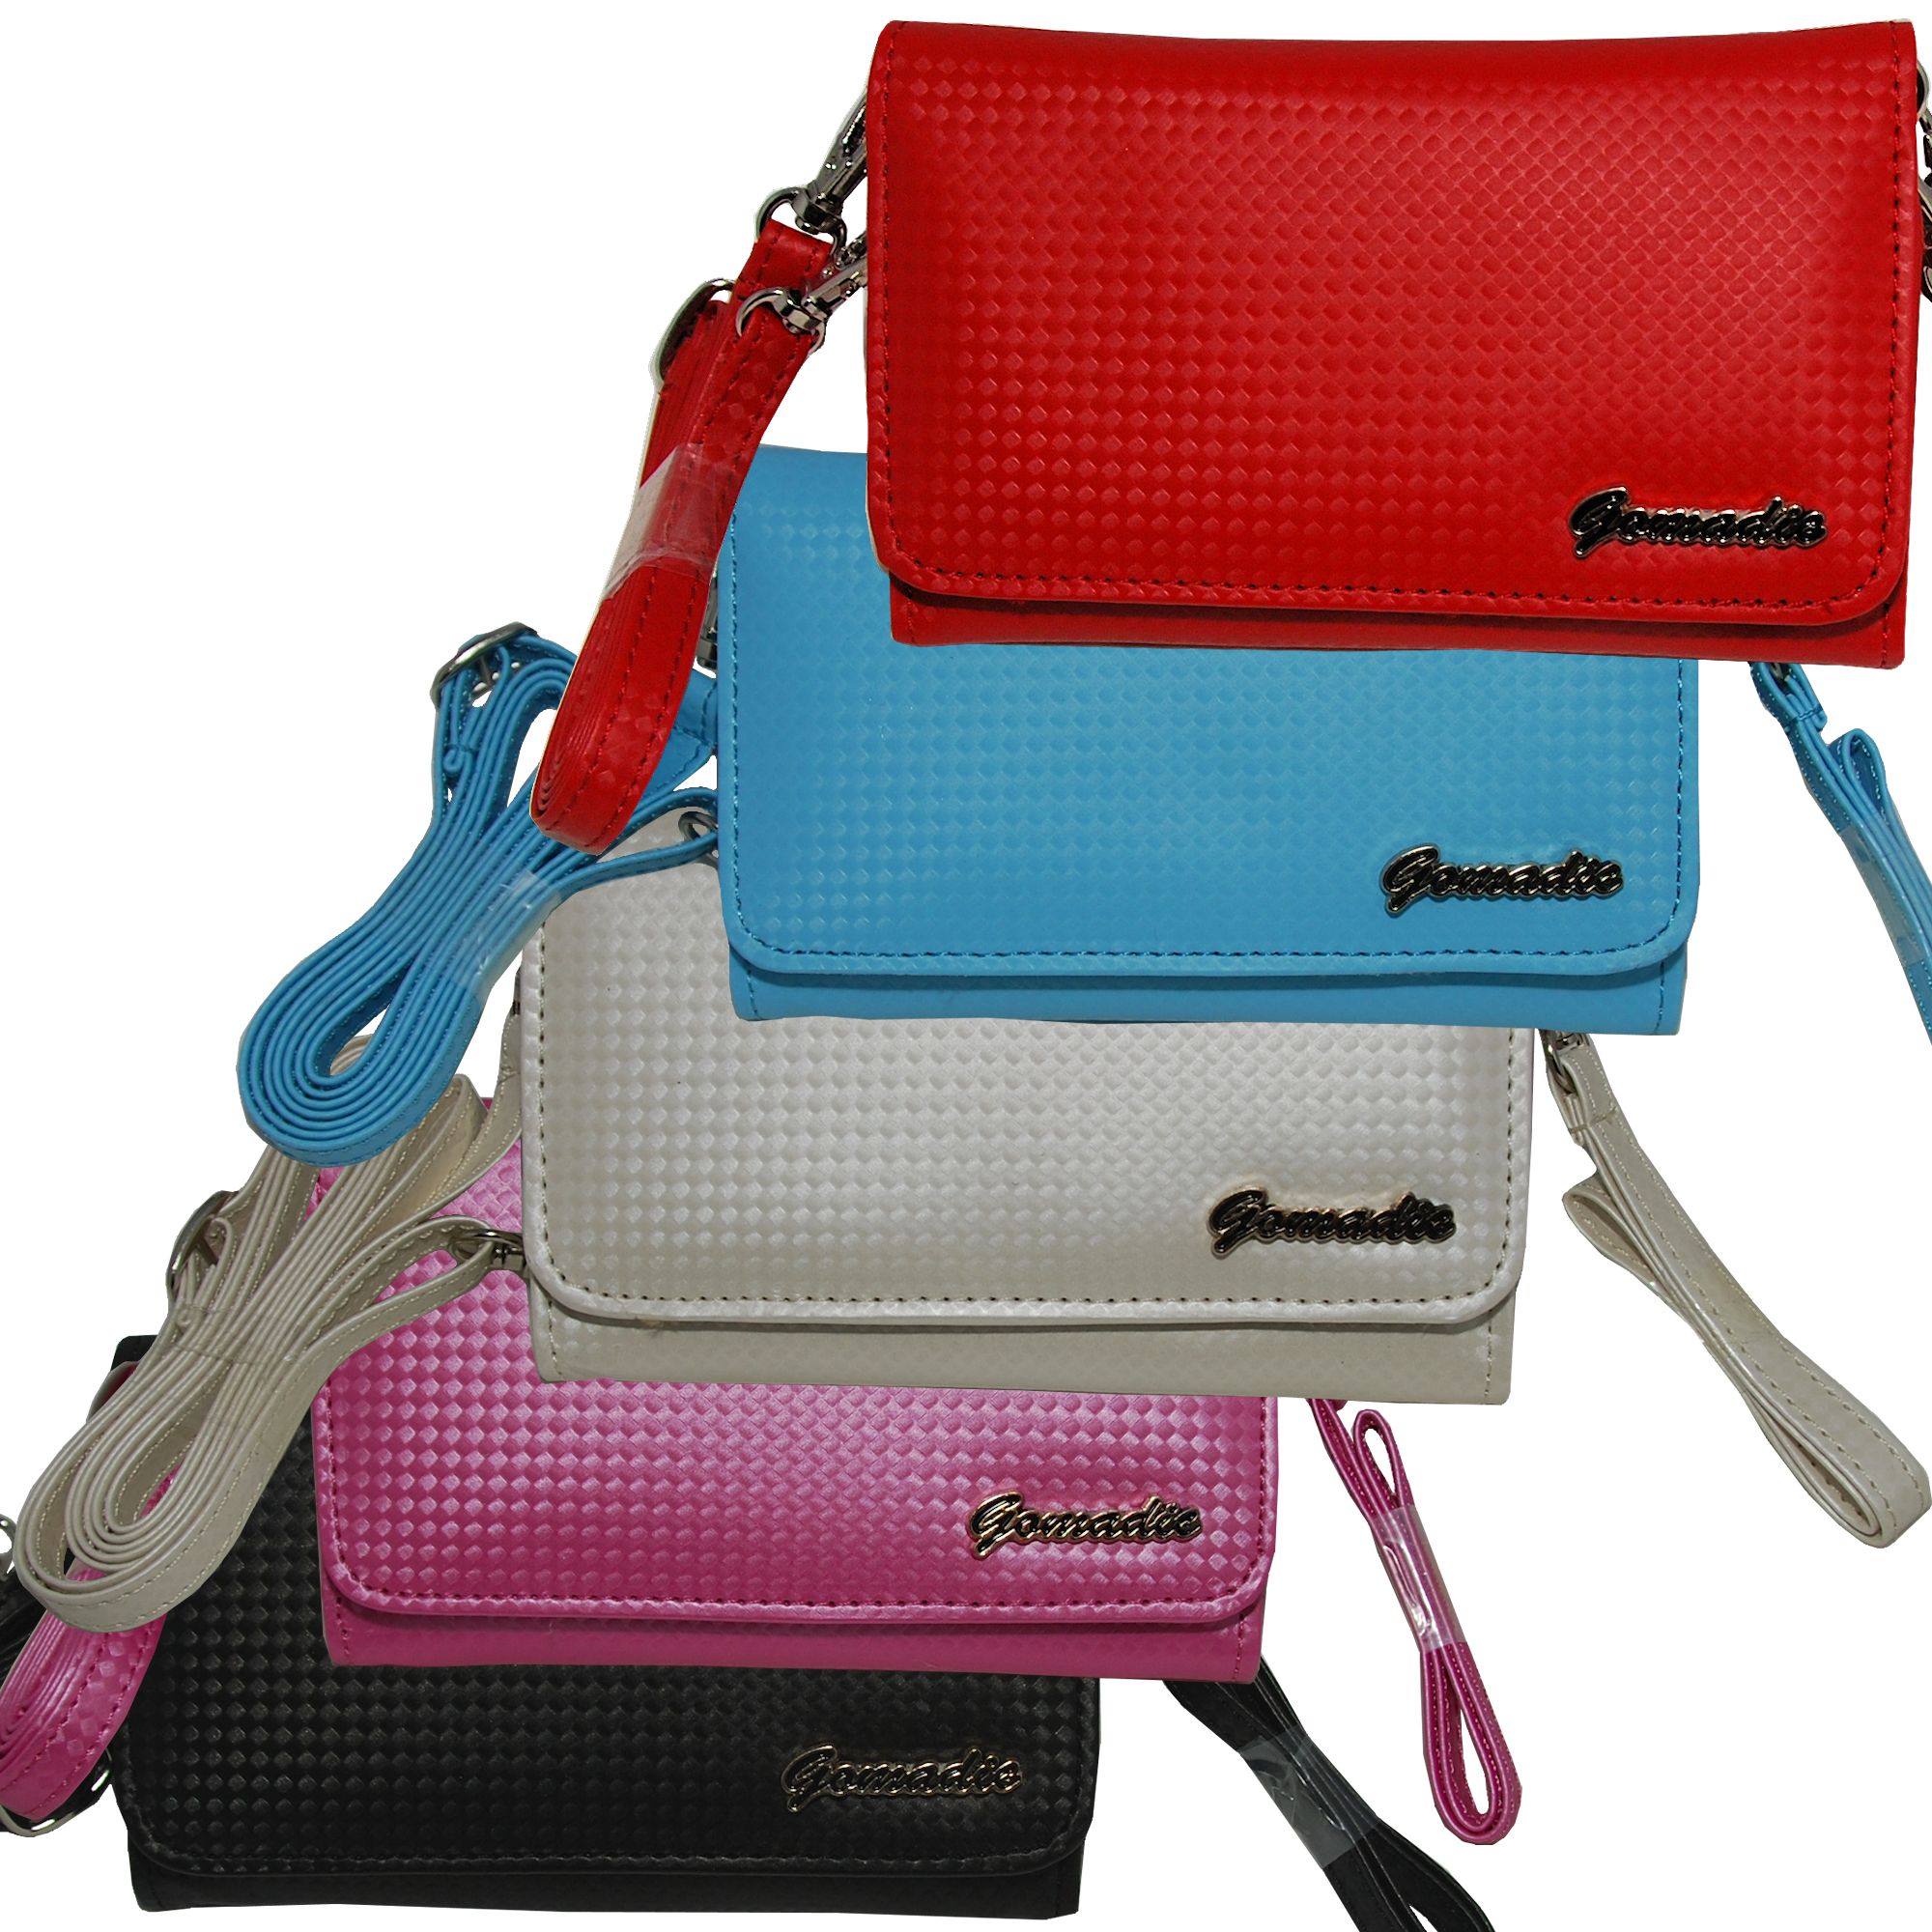 Purse Handbag Case for the Nokia 6300 6301 6555 6650  - Color Options Blue Pink White Black and Red